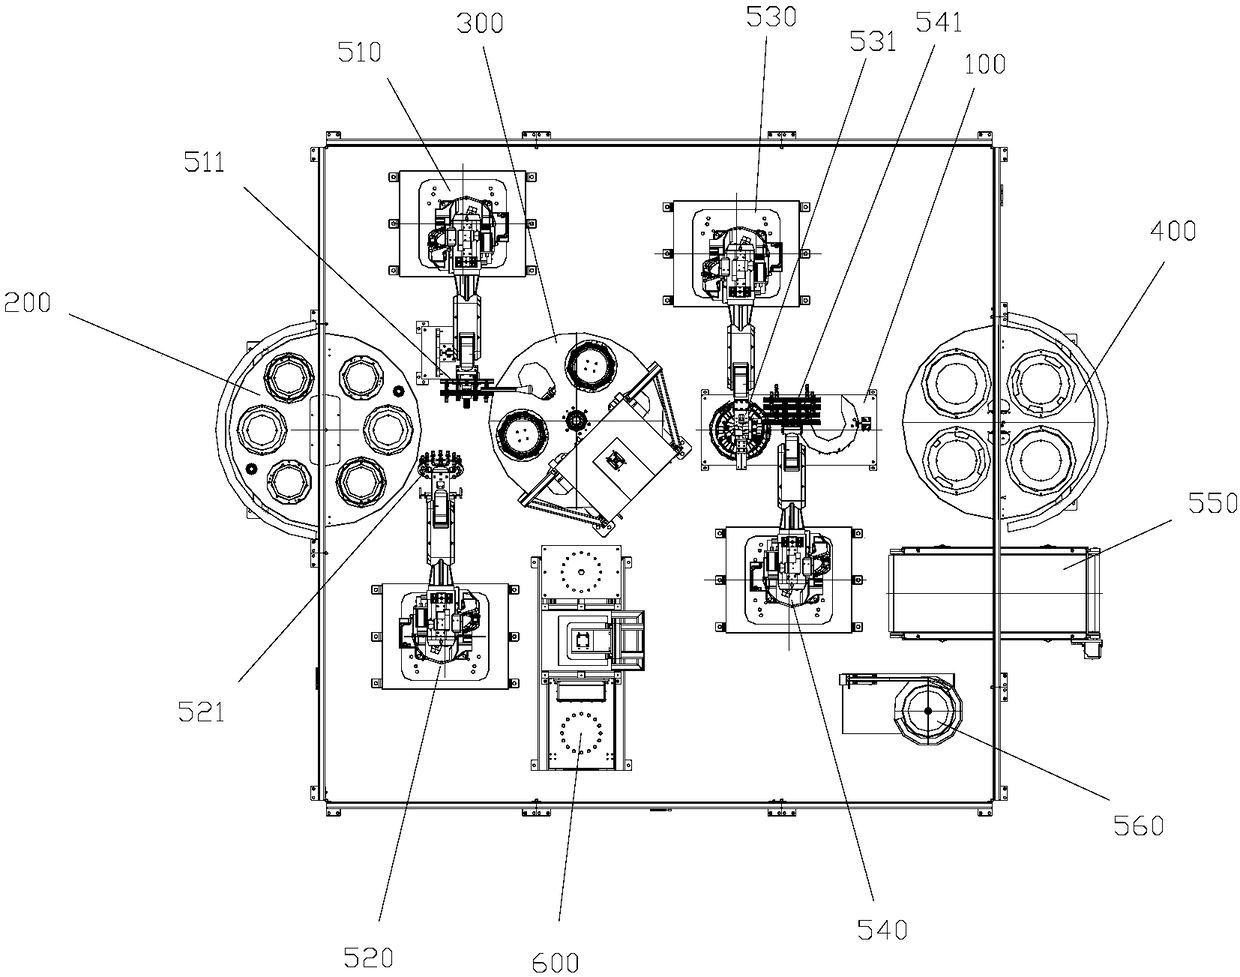 Bearing assembly equipment